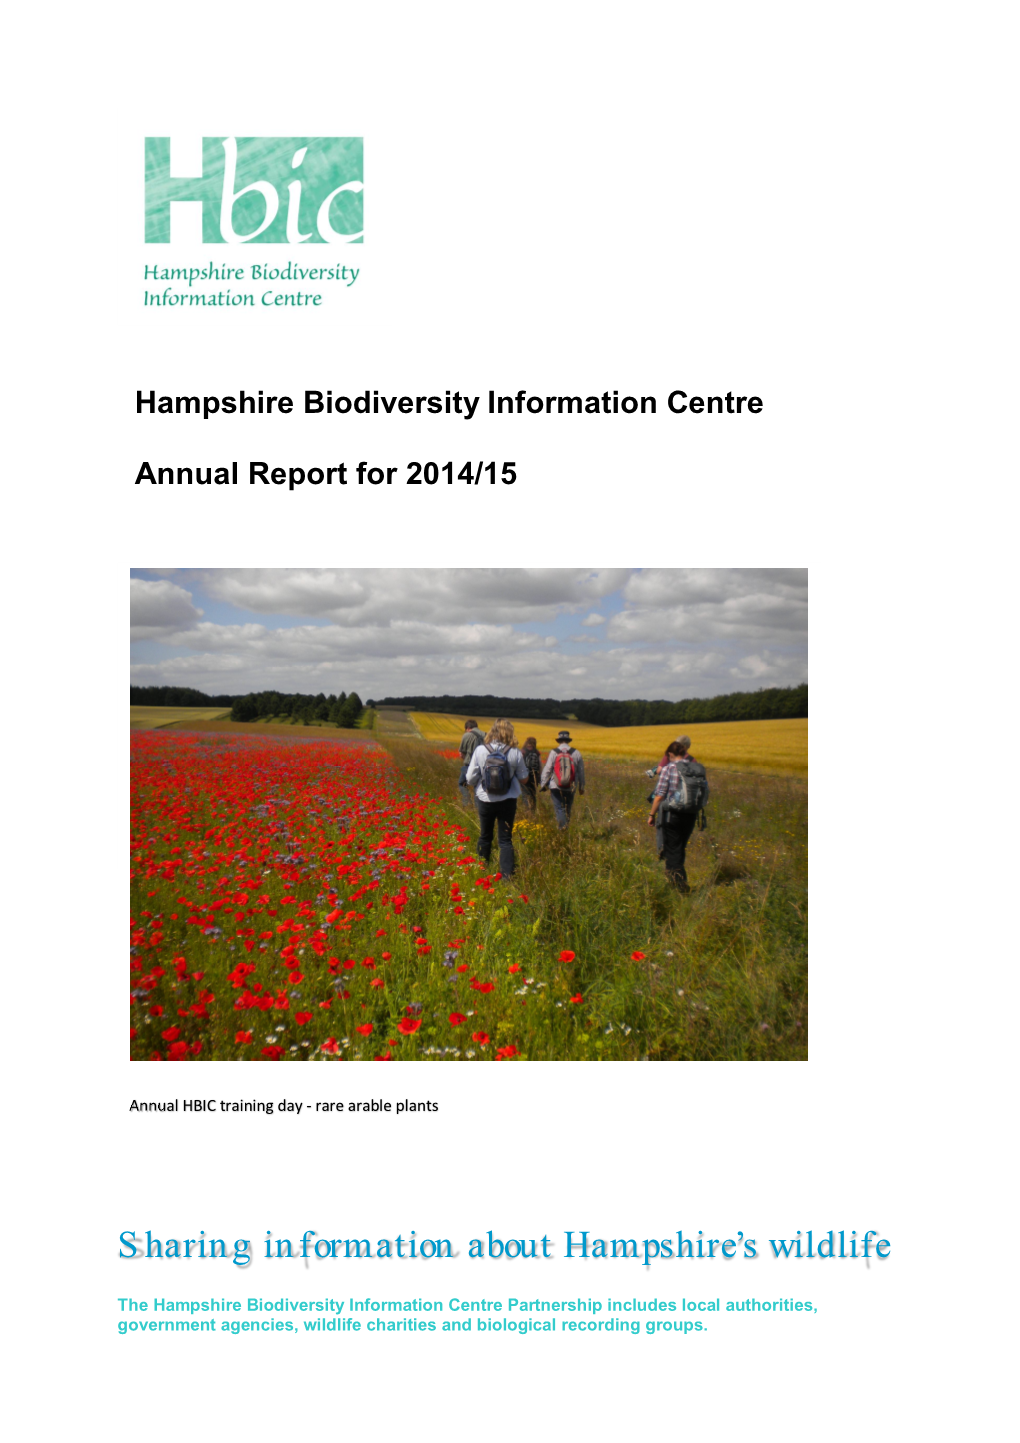 Sharing Information About Hampshire's Wildlife